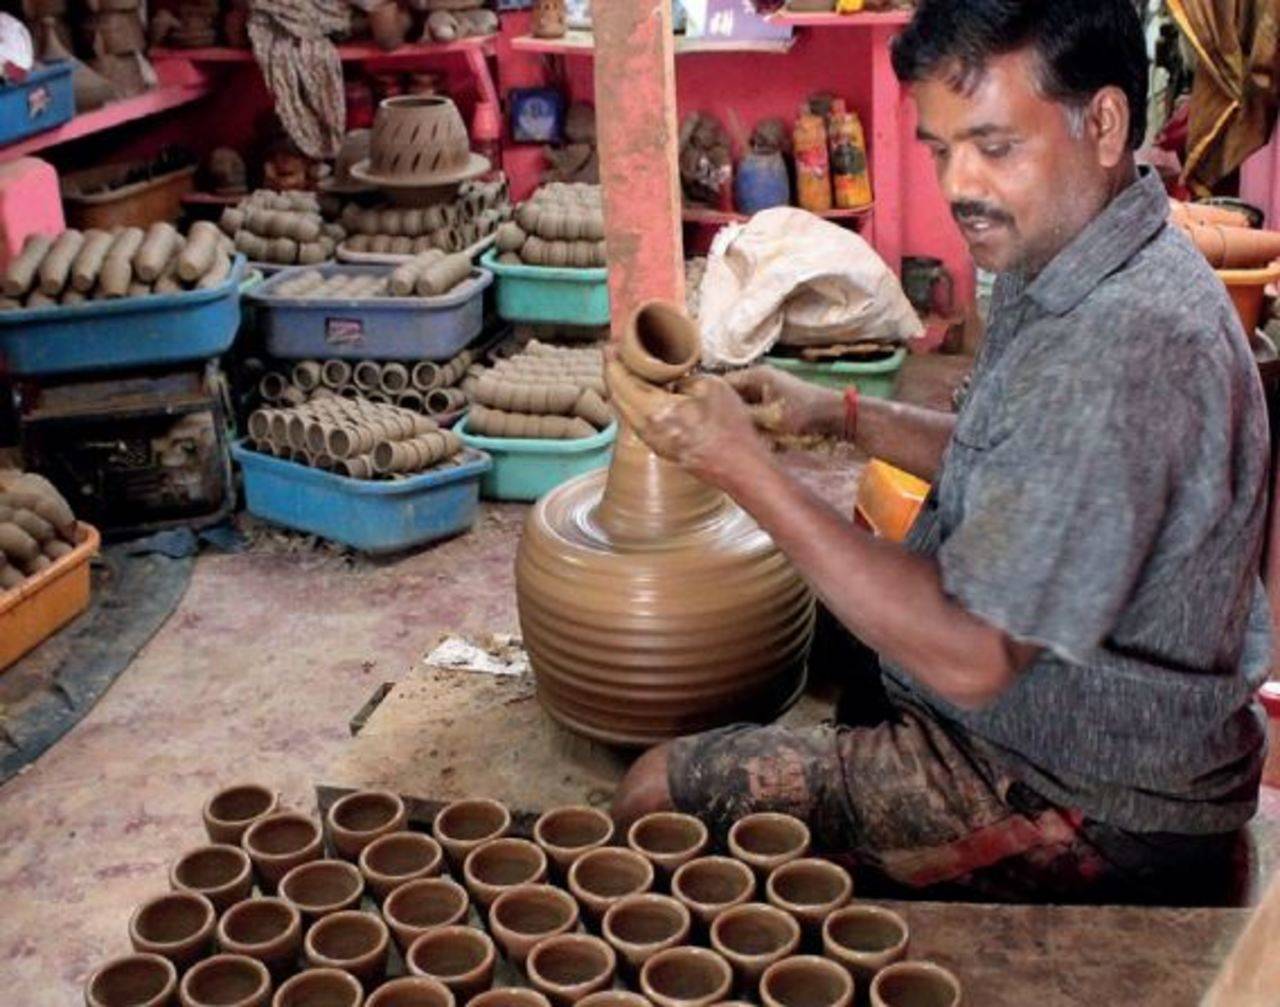 Century-old pottery town fights battle for survival | Bengaluru News - Times of India